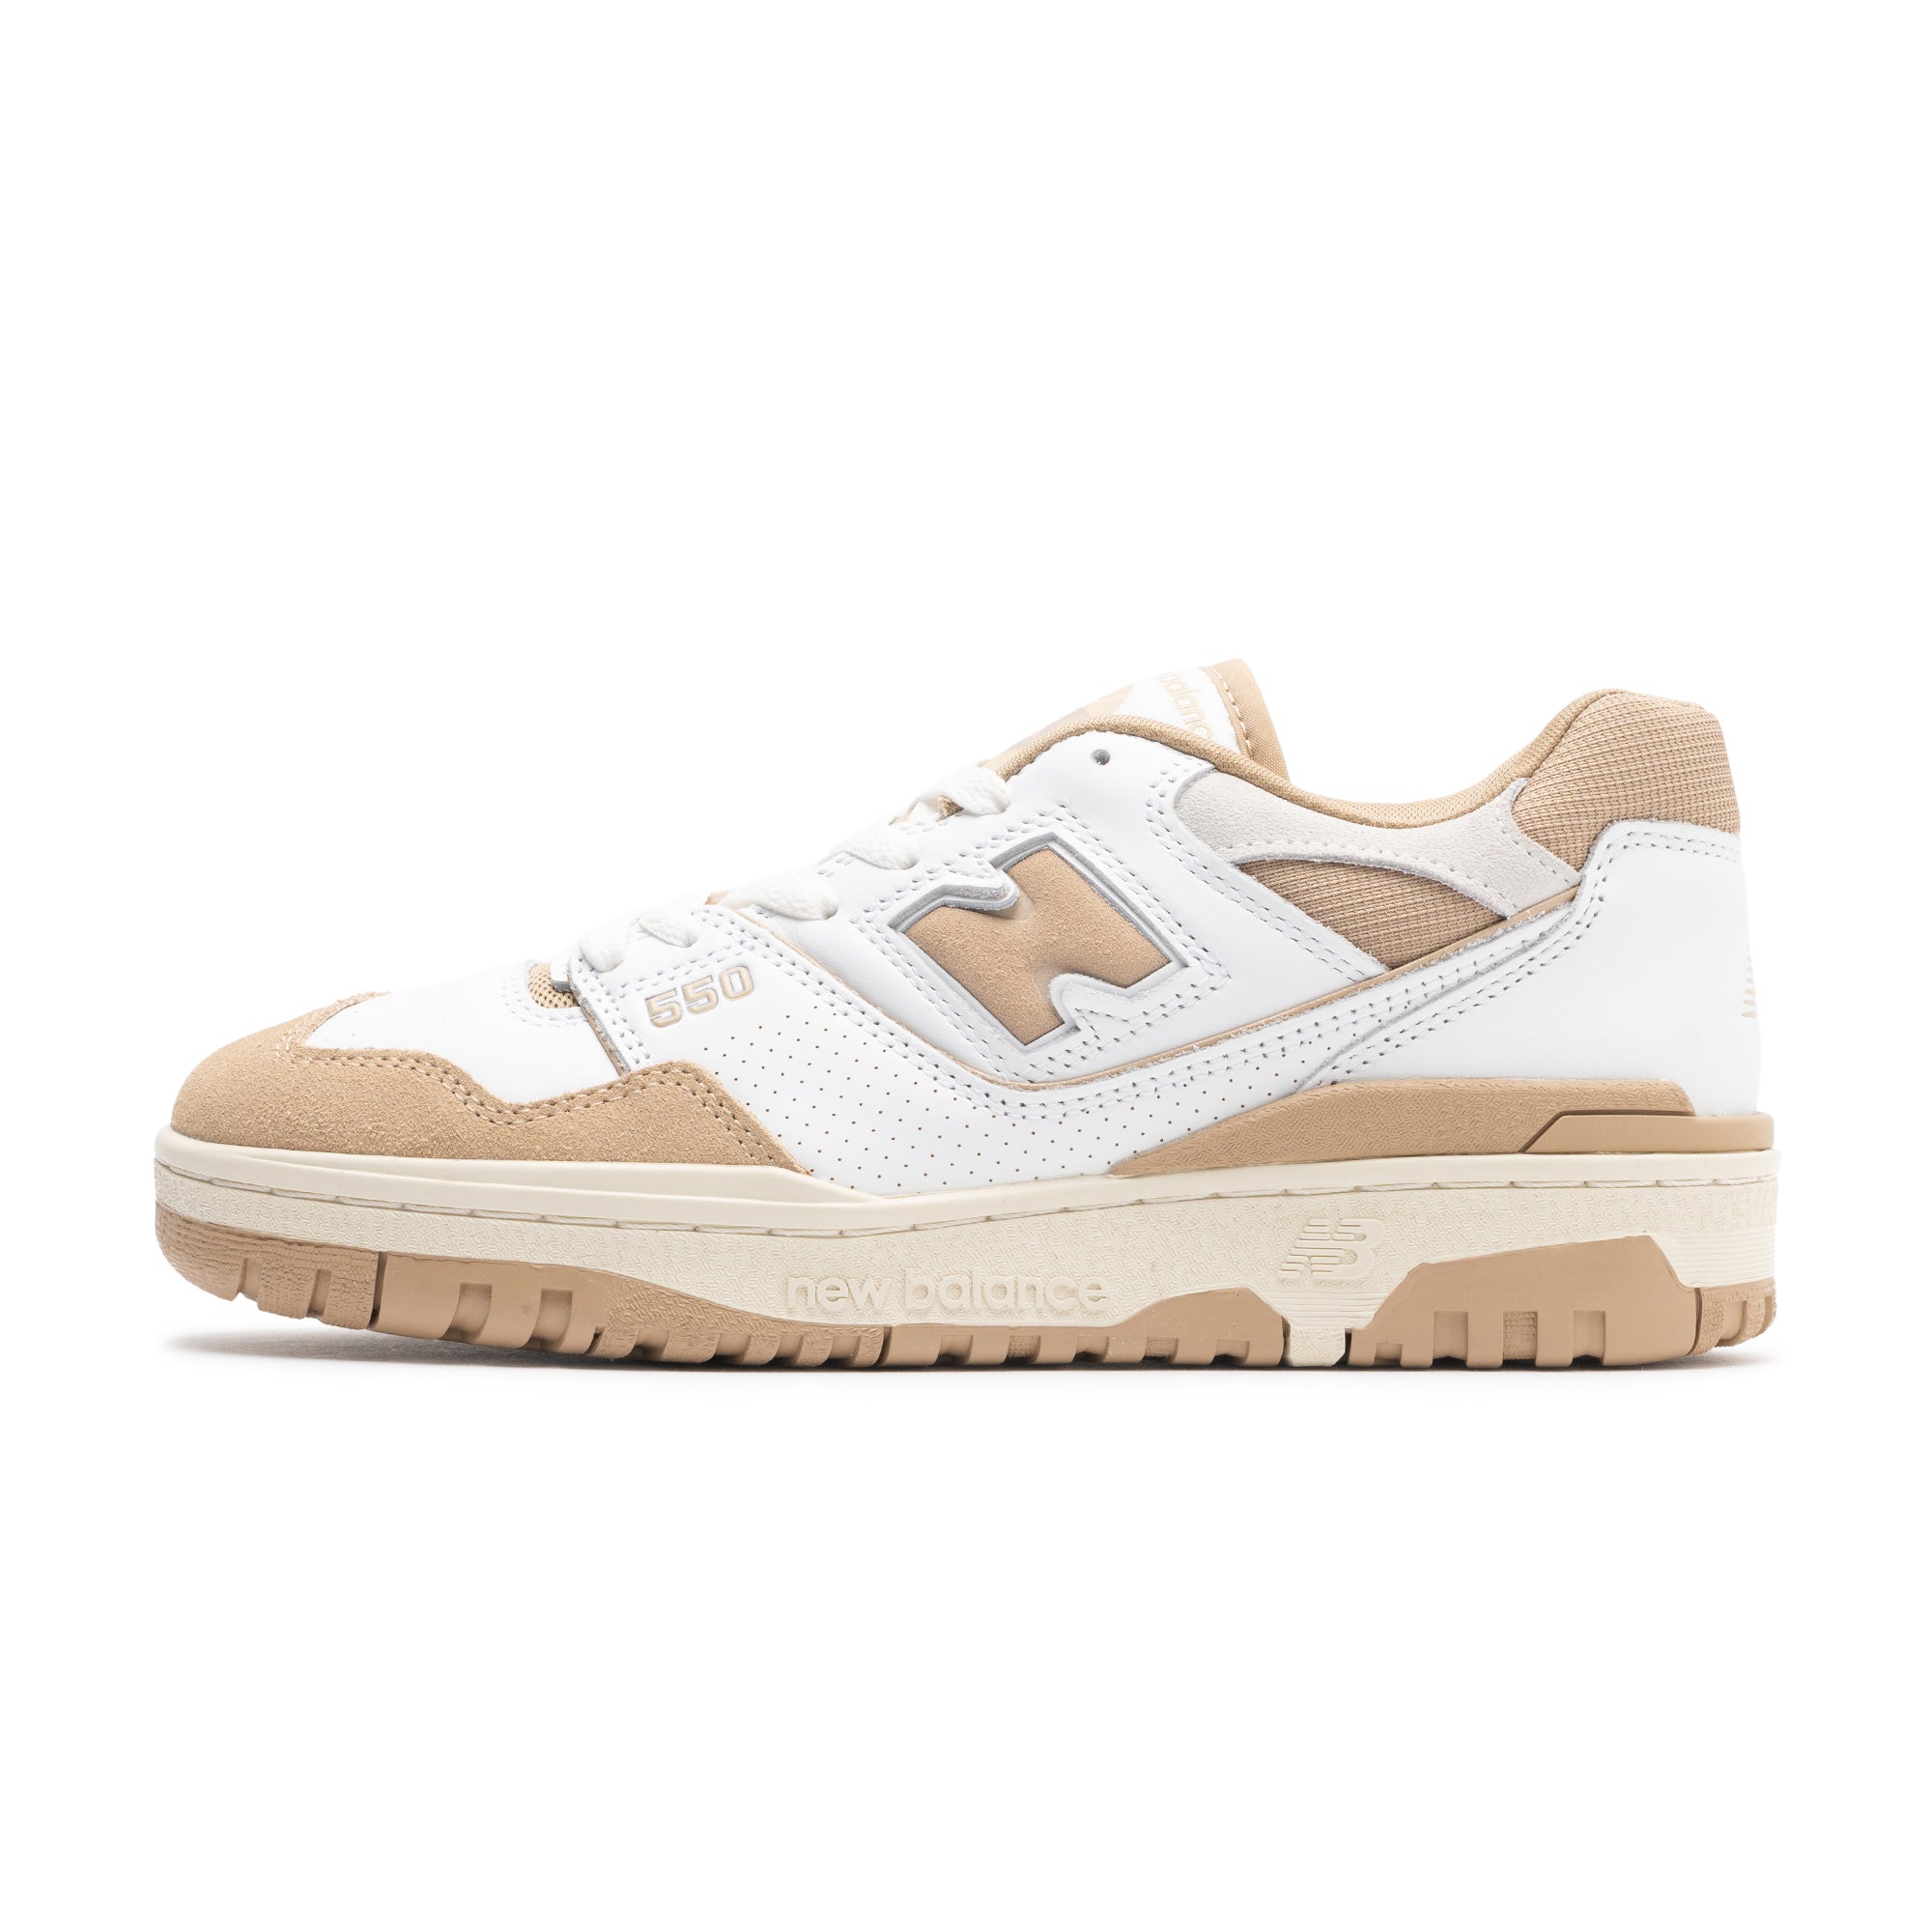 Get the on The Sole Womens app and always get first dibs on the newest New Balance collaborations